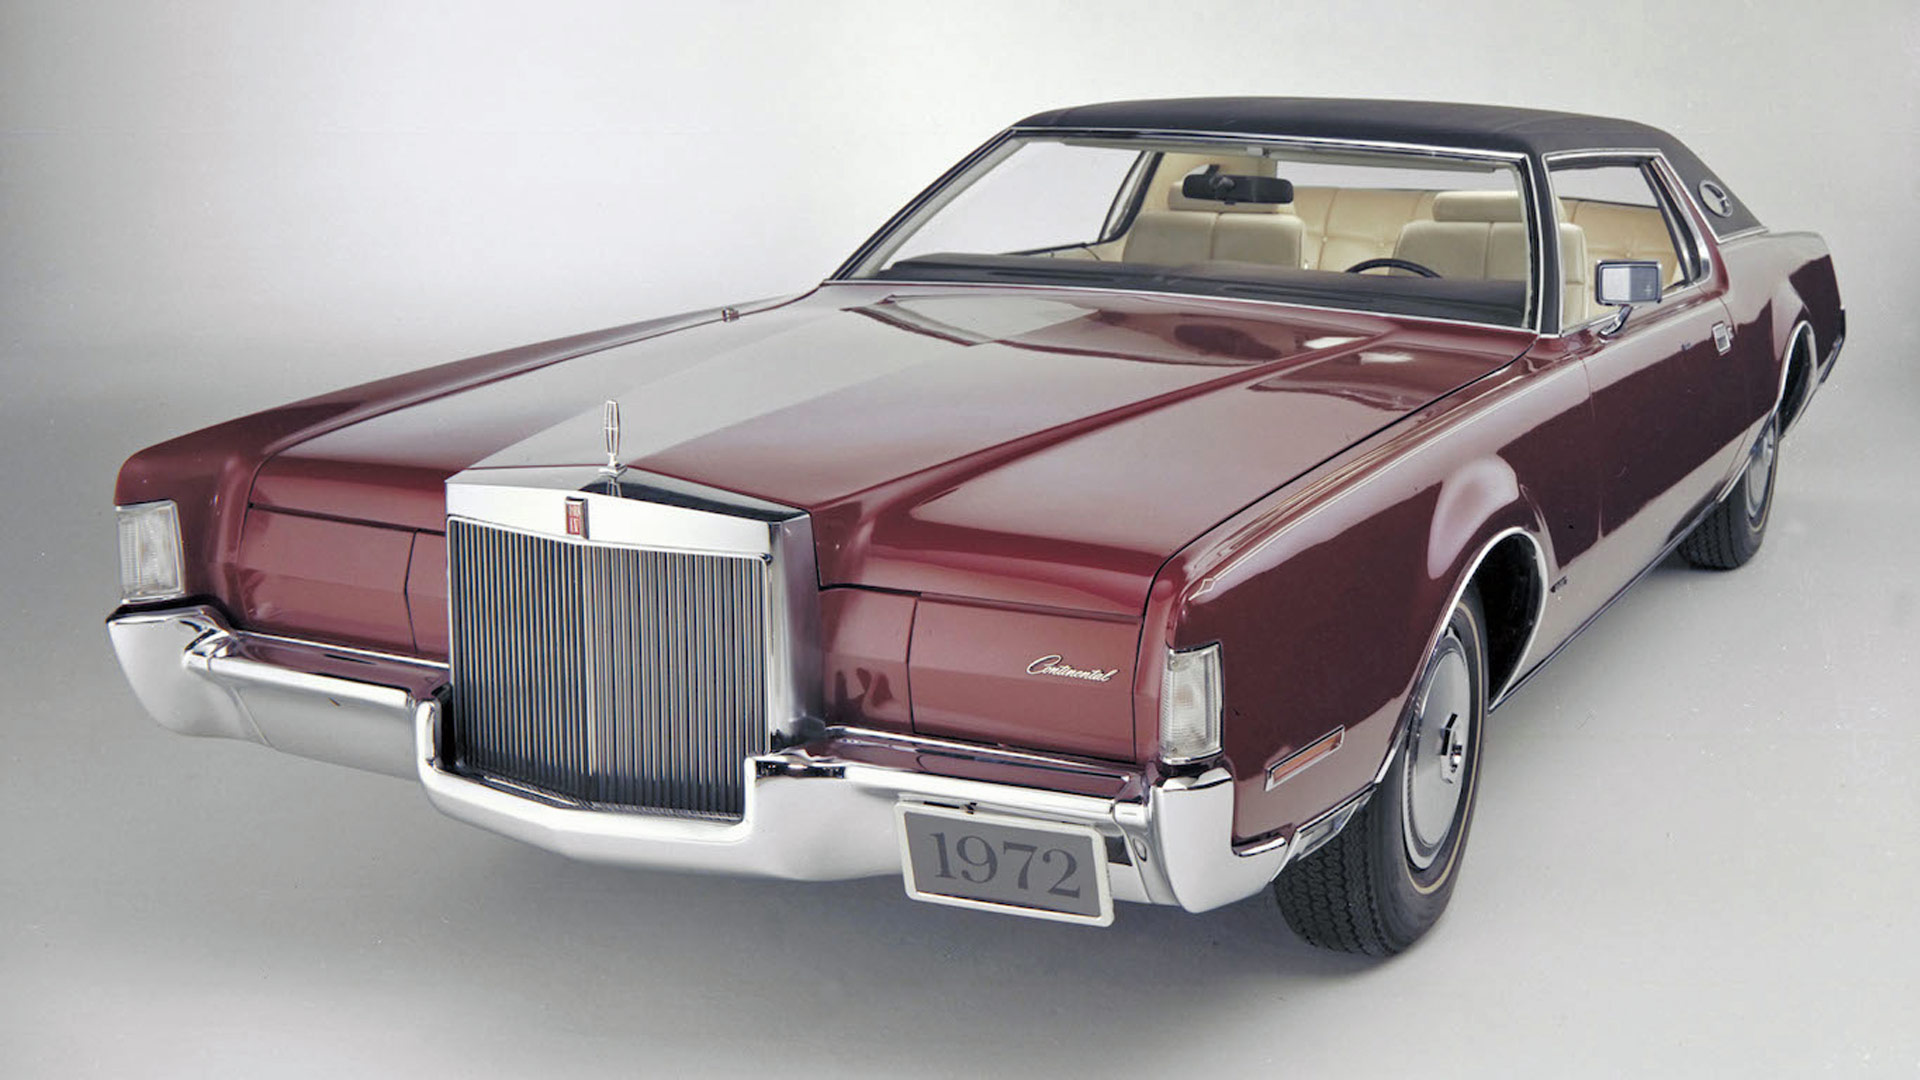 1972 Lincoln Continental Mark IV – 228.1 inches